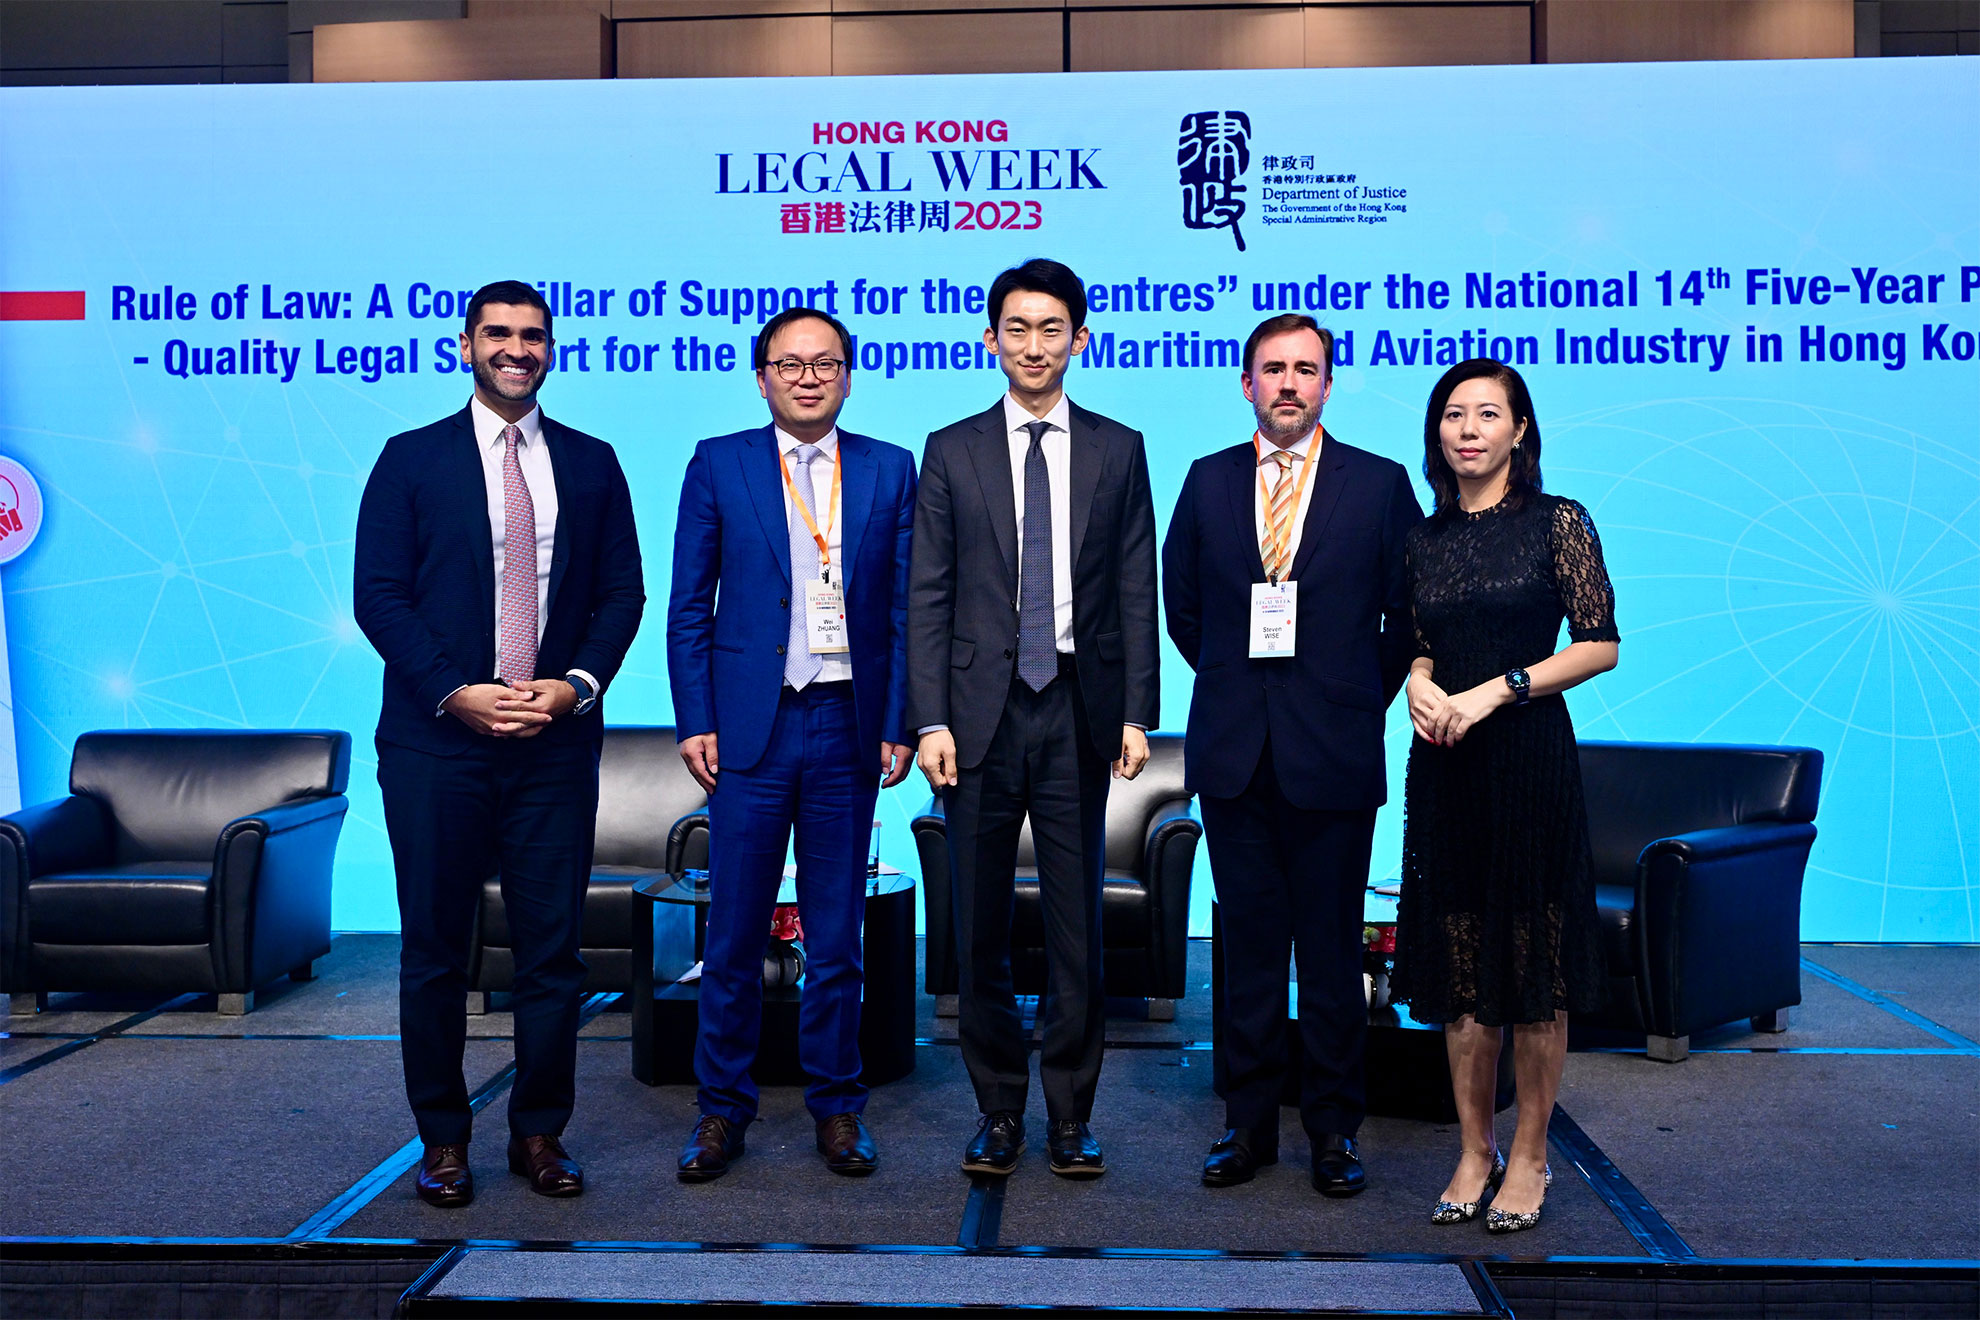 Hong Kong Legal Week 2023, an annual flagship event of the legal sector and the Department of Justice, successfully concluded today (November 10). Photo shows (from right) the President of the Hong Kong Logistics Association, Ms Elsa Yuen; Partner, Lau, Horton and Wise LLP Mr Steven Wise; Associate Professor, Assistant Dean (Undergraduate Studies) and Programme Director (LLB) of the Faculty of Law of the Chinese University of Hong Kong Professor Lee Jae Woon; Regional Manager, Asia of BIMCO Mr Wei Zhuang; and Global Head of Aviation and Marine, Senior Partner, Withersworldwide and Chairperson of The Hague Court of Arbitration for Aviation Mr Paul Jebely, at the panel discussion: Rule of Law: A Core Pillar of Support for the “8 Centres” under the National 14th Five-Year Plan - Quality Legal Support for the Development of Maritime and Aviation Industry in Hong Kong at the Rule of Law for the Future.